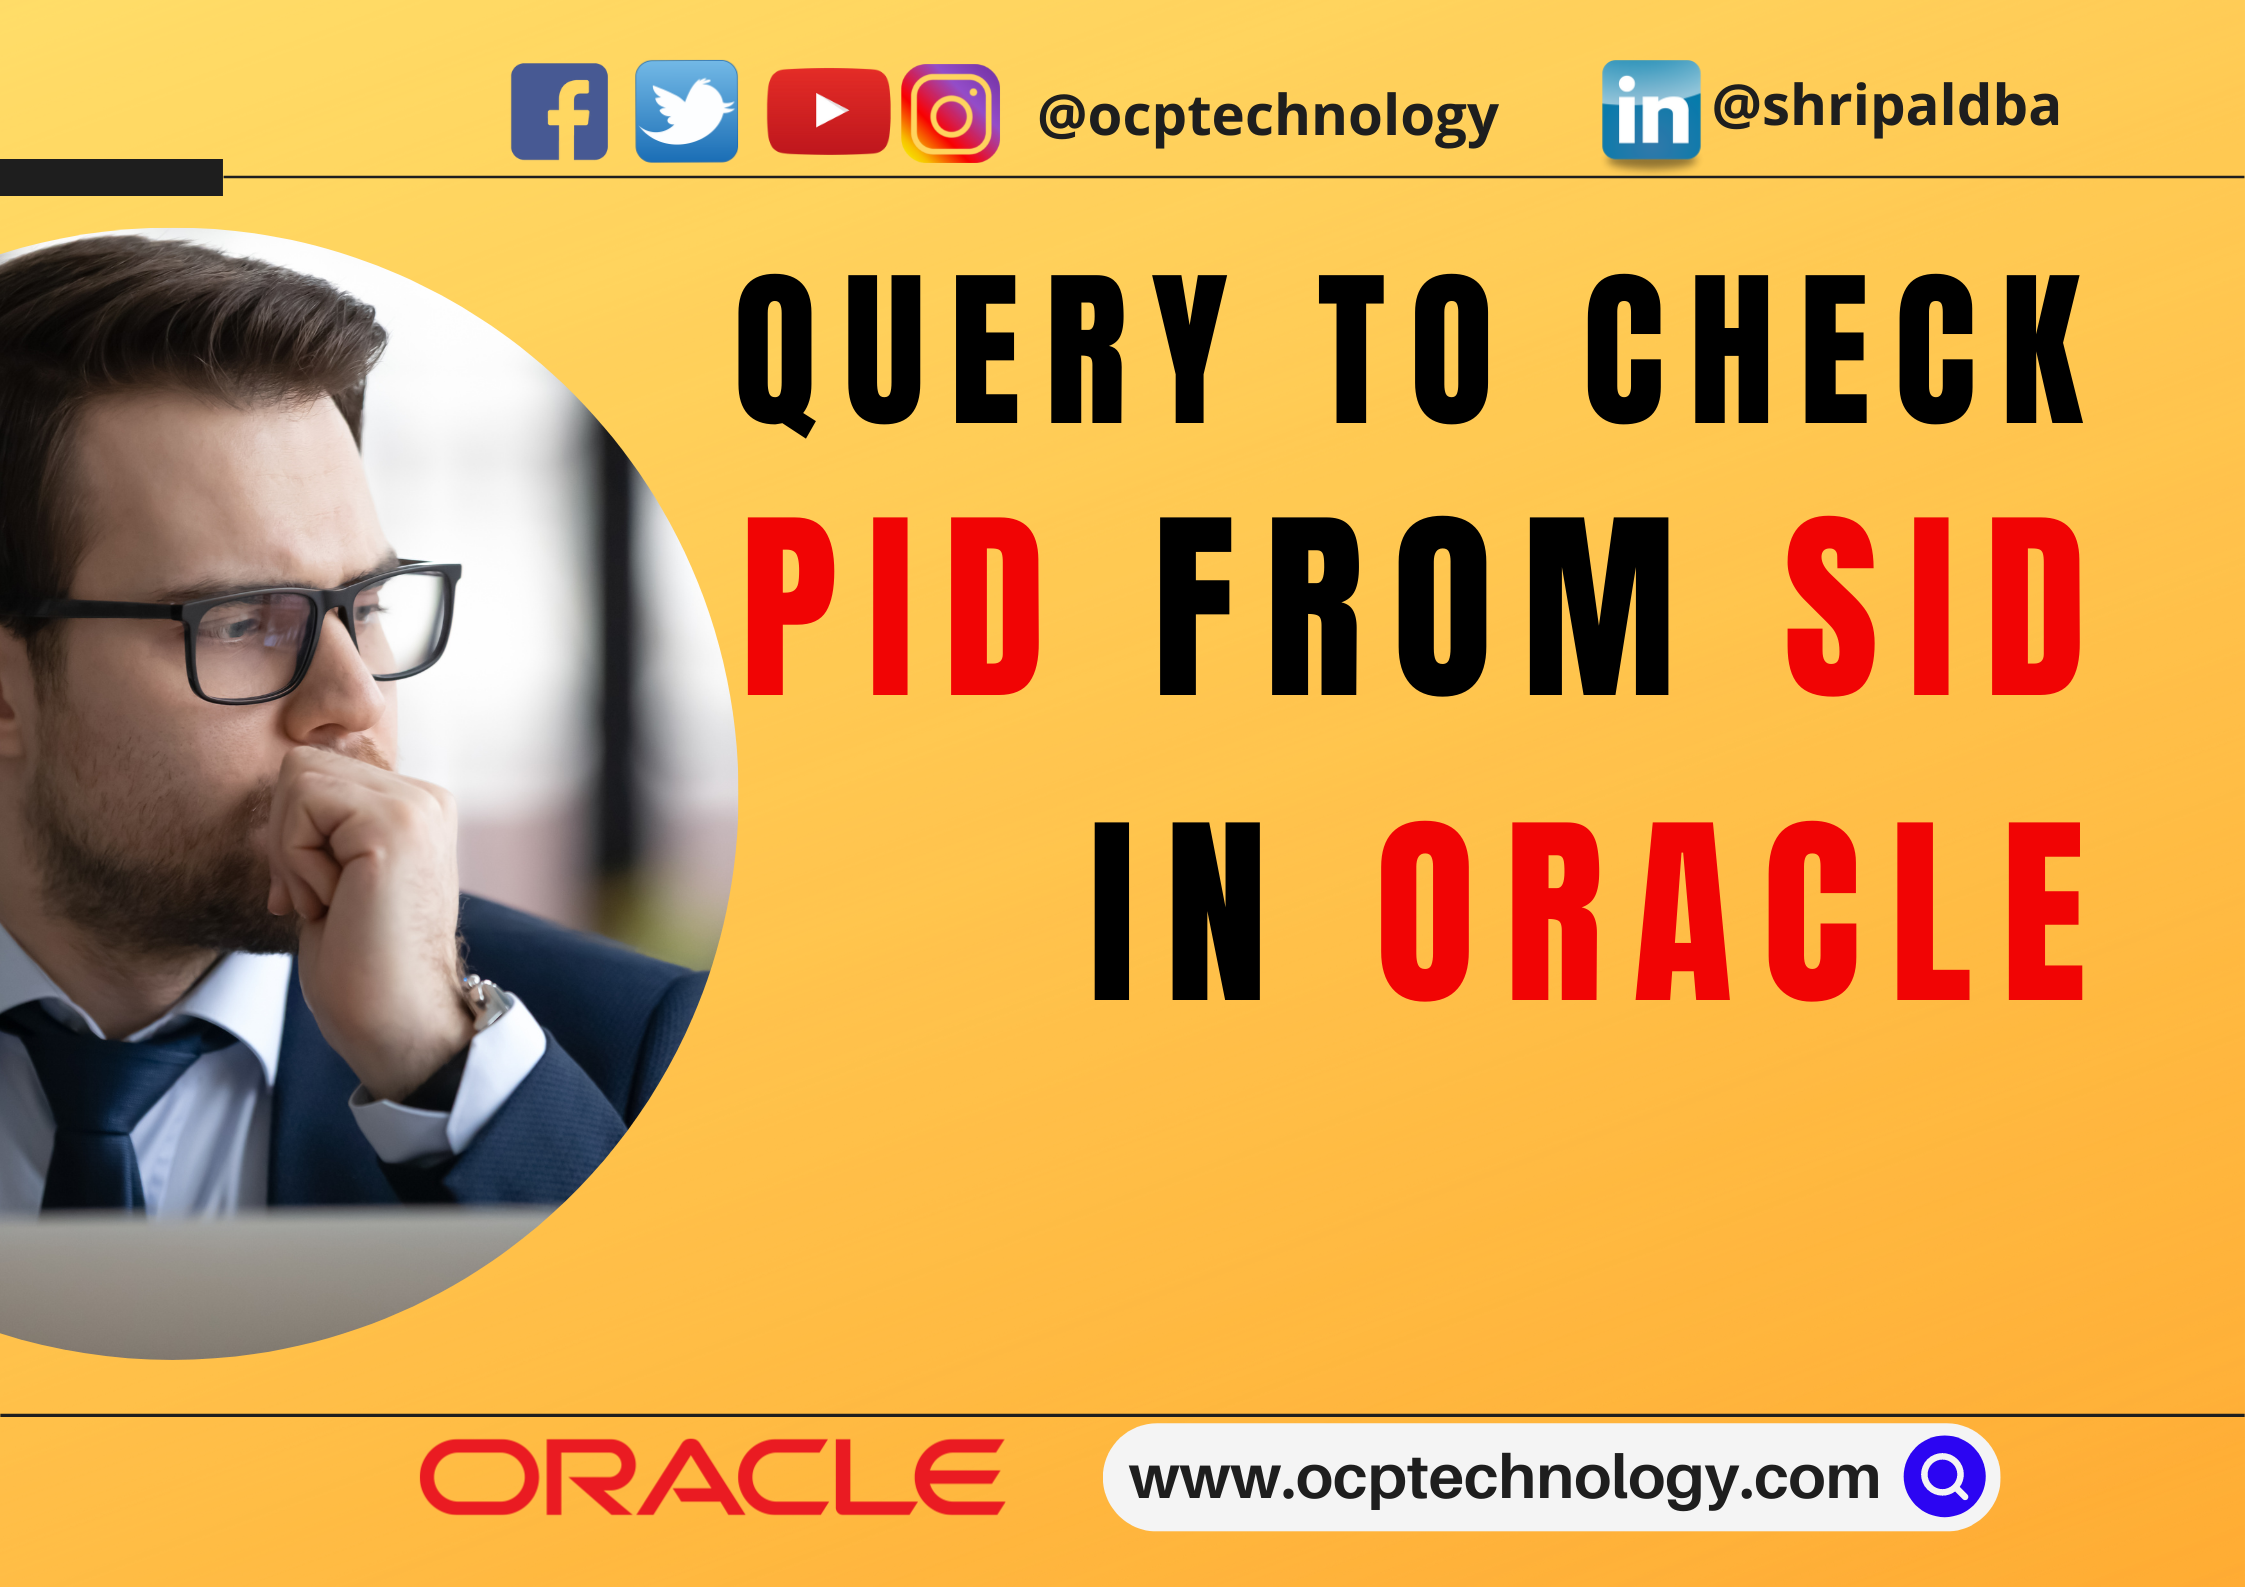 Identify OS PID from SID